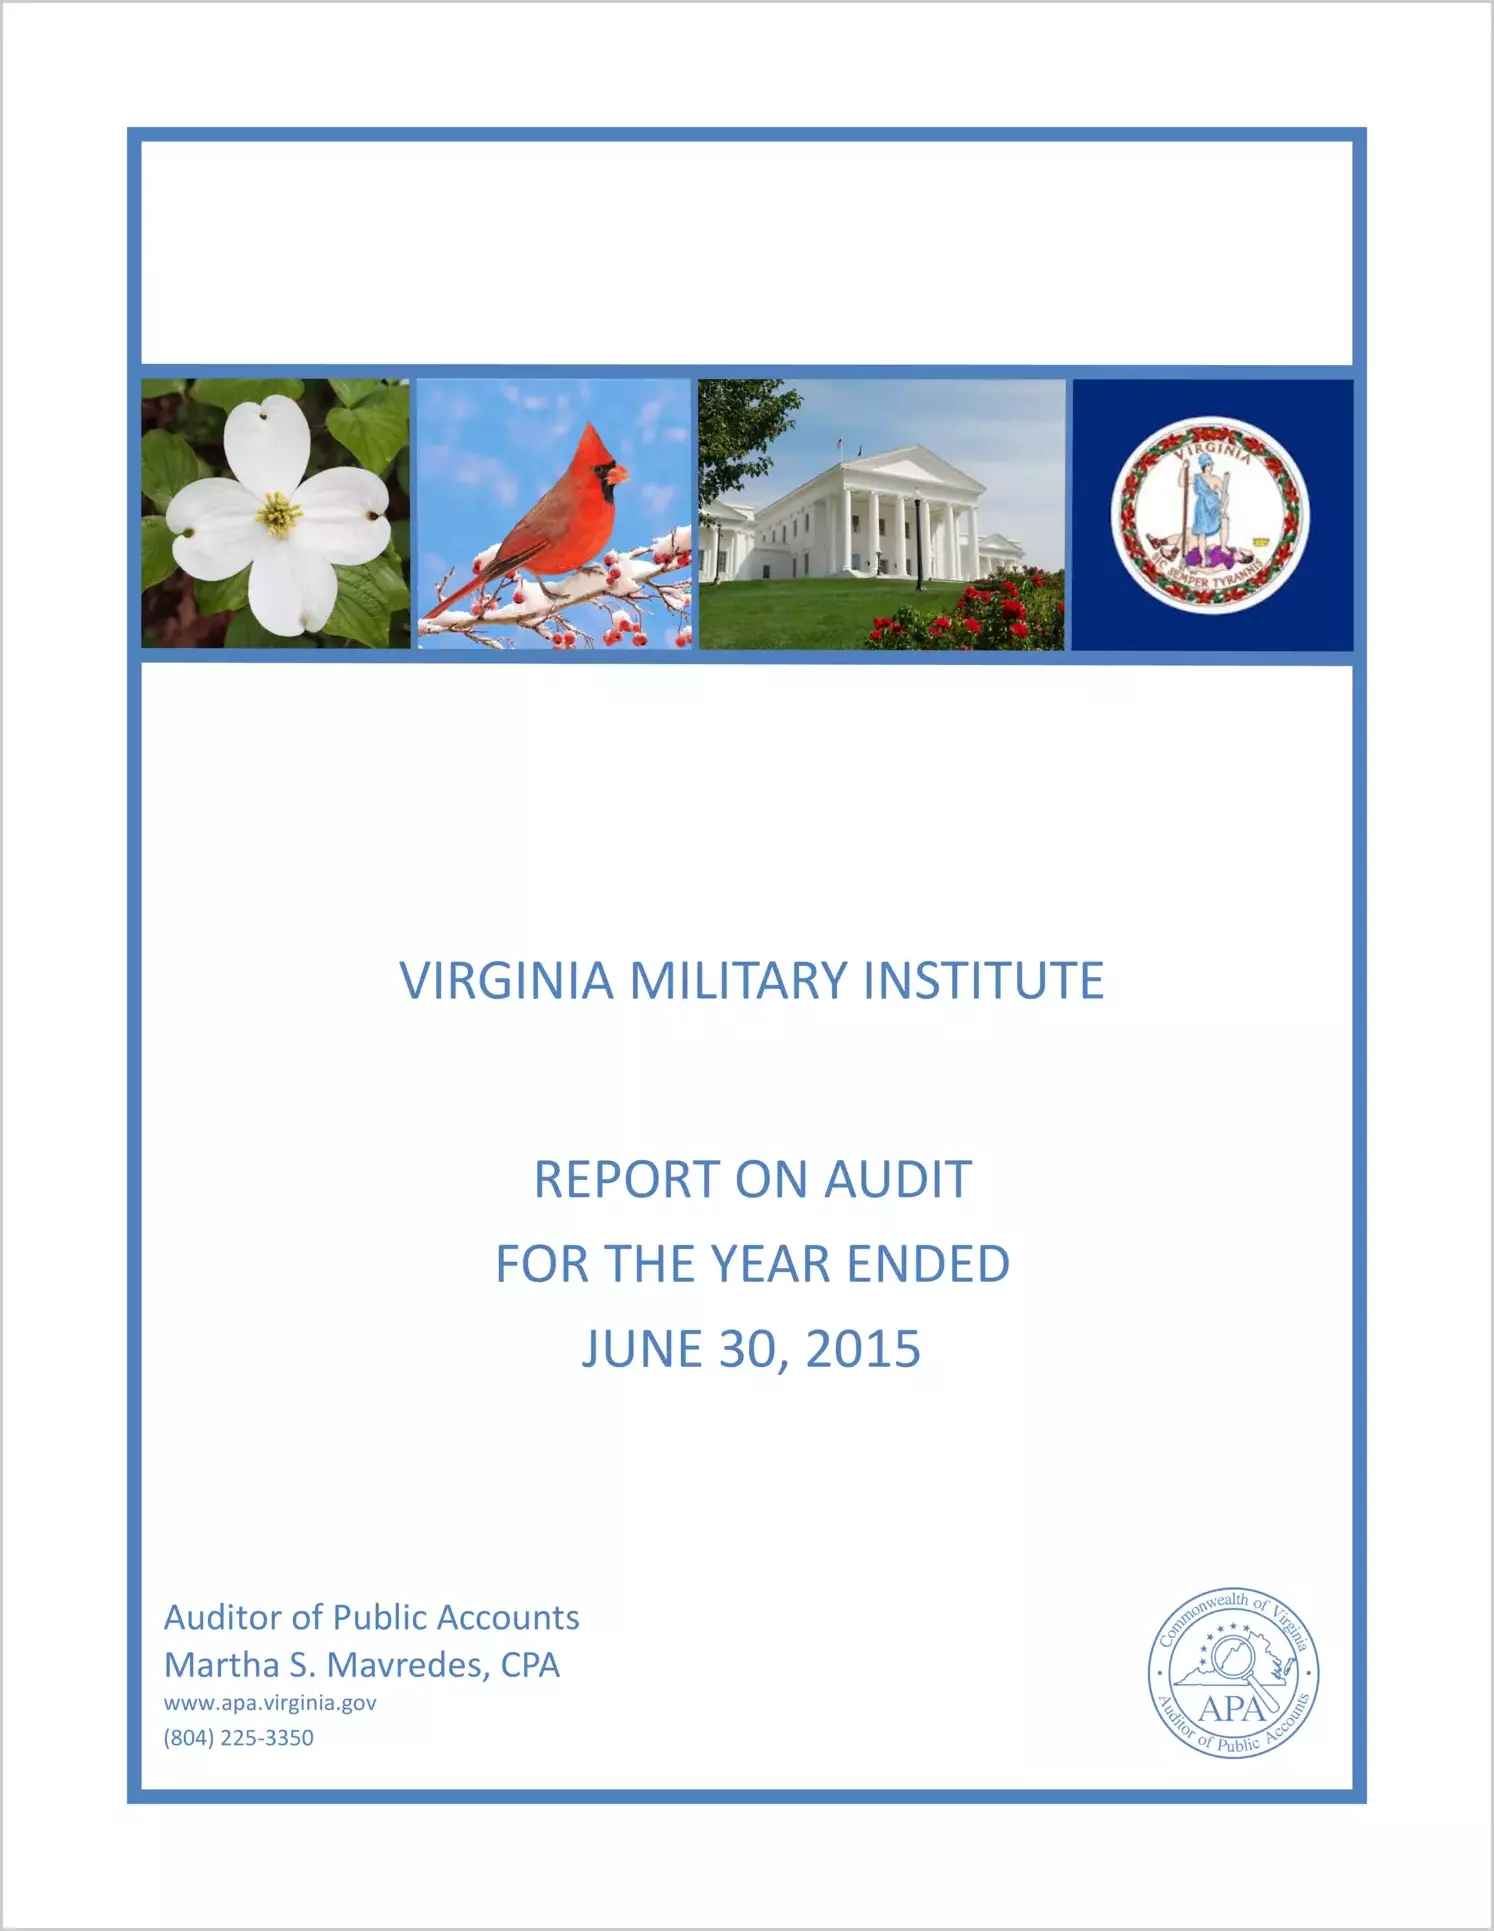 Virginia Military Institute for the Year Ended June 30, 2015